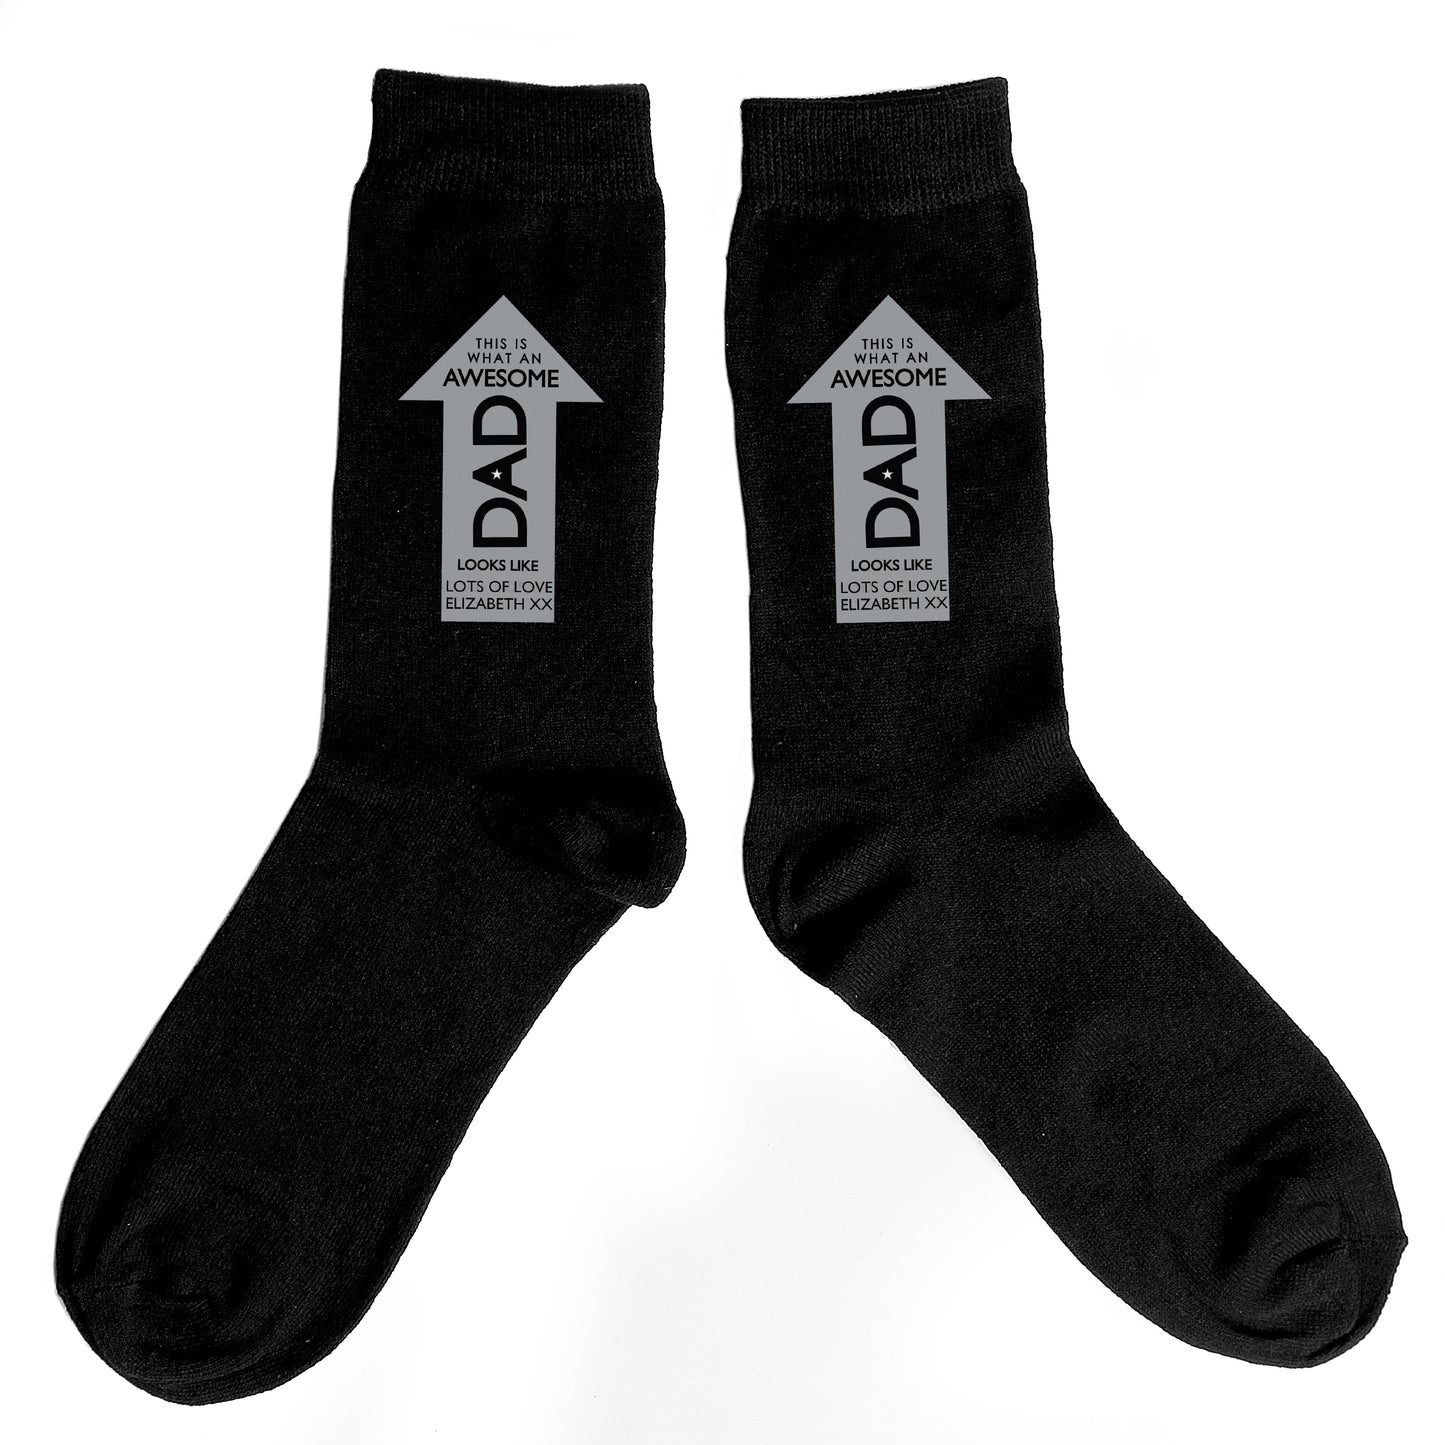 Personalised Awesome Dad Men's Socks - Personalise It!